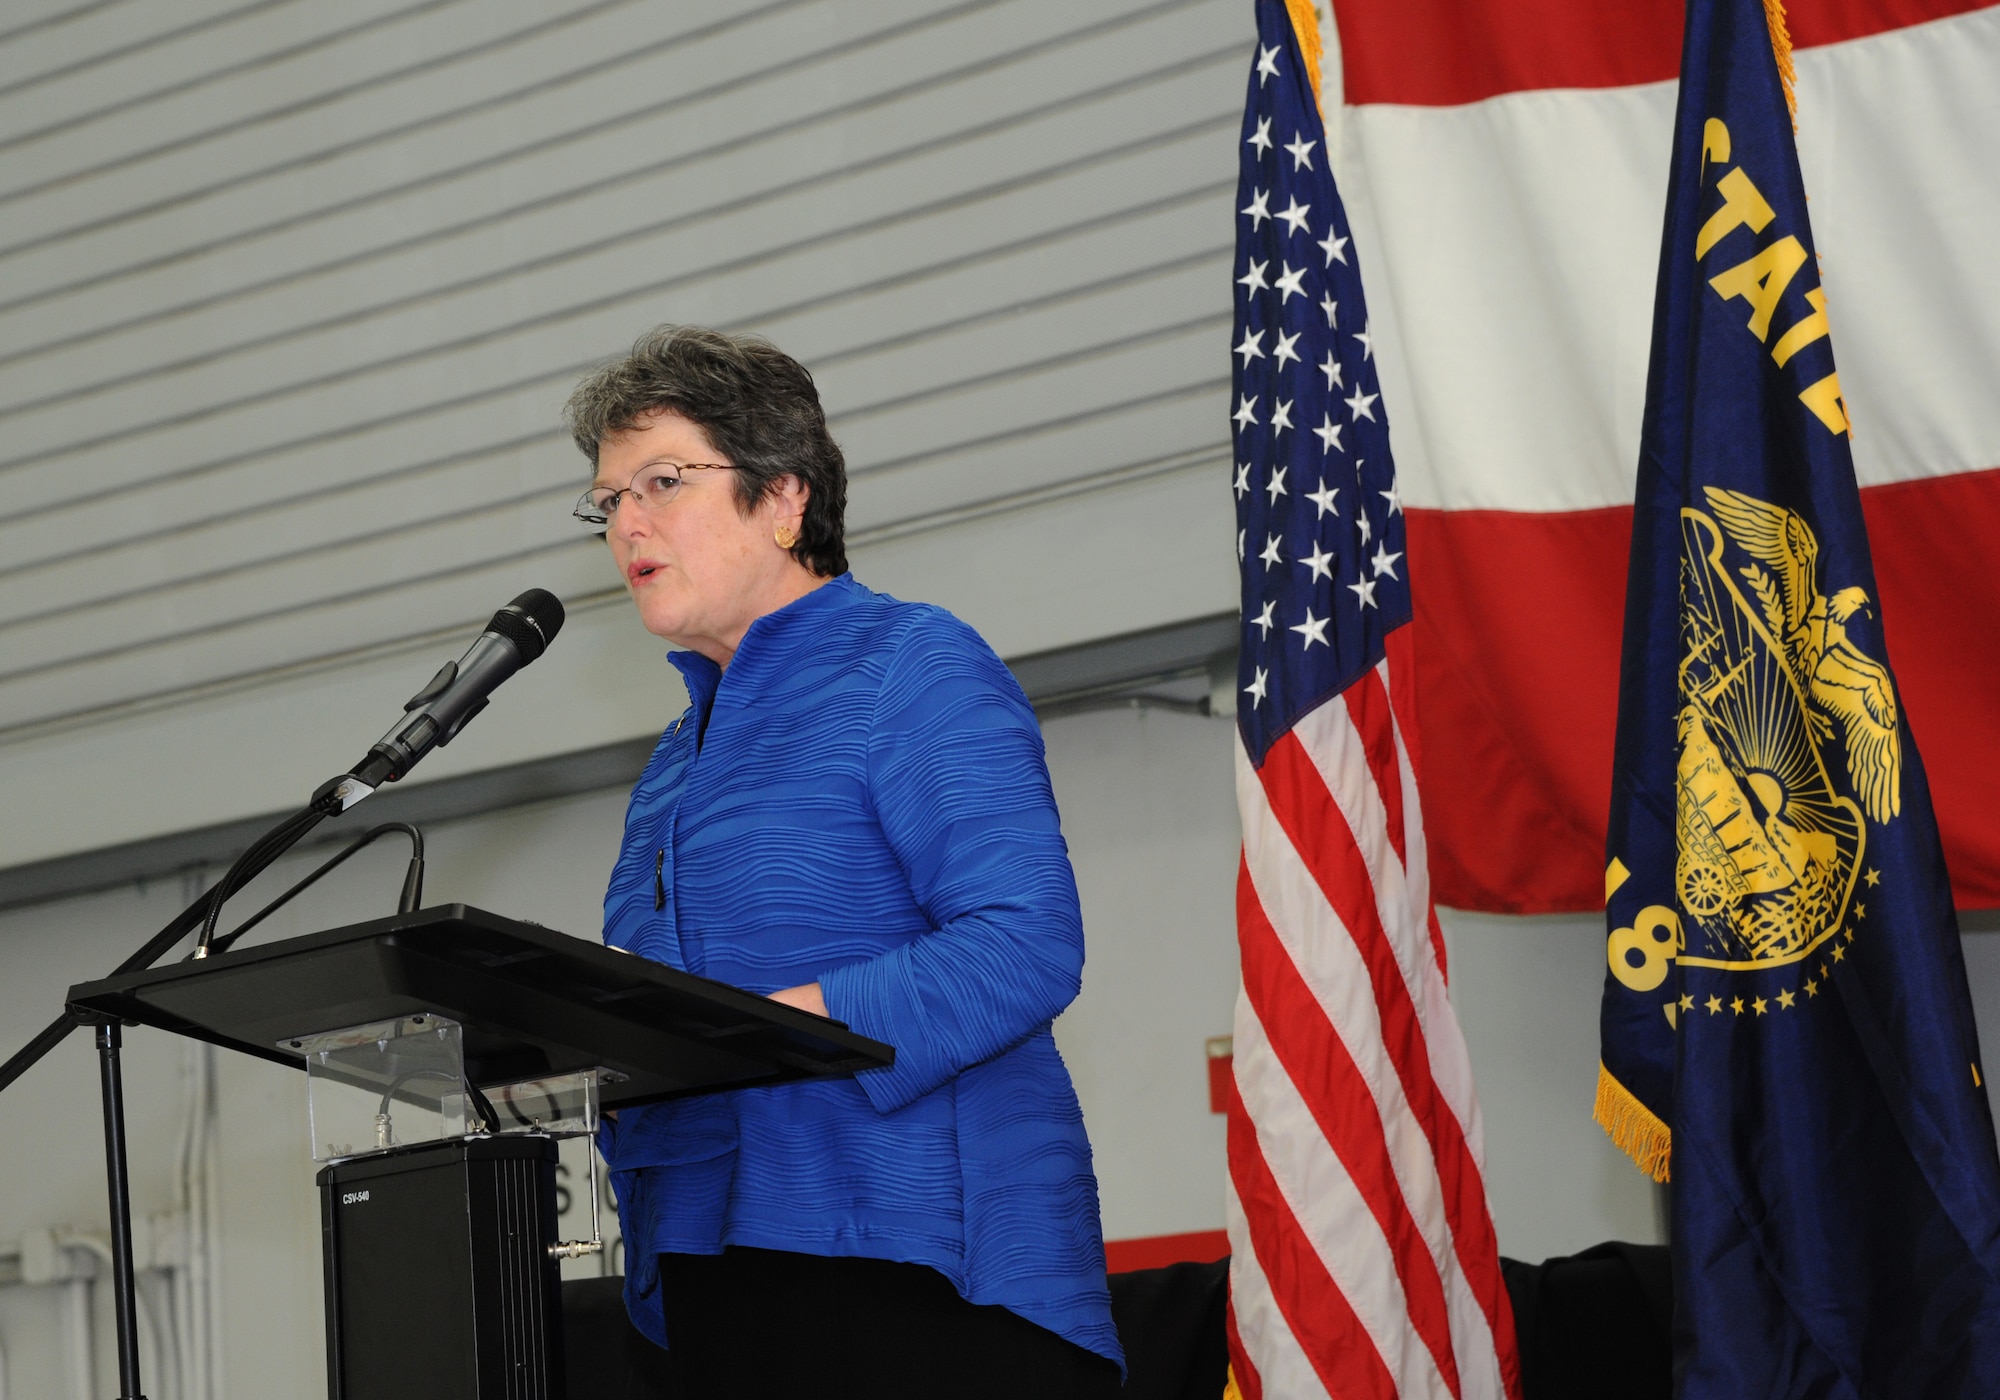 Oregon Secretary of State Jeanne Atkins addresses the Airmen of the 142nd Fighter Wing, coworkers and families during the demobilization ceremony for the 123rd Expeditionary Fighter Squadron, 142nd Fighter Wing, Nov. 6, 2015, Portland Air National Guard Base, Ore. (U.S. Air National Guard photo by Tech. Sgt. John Hughel, 142nd Fighter Wing Public Affairs/Released)